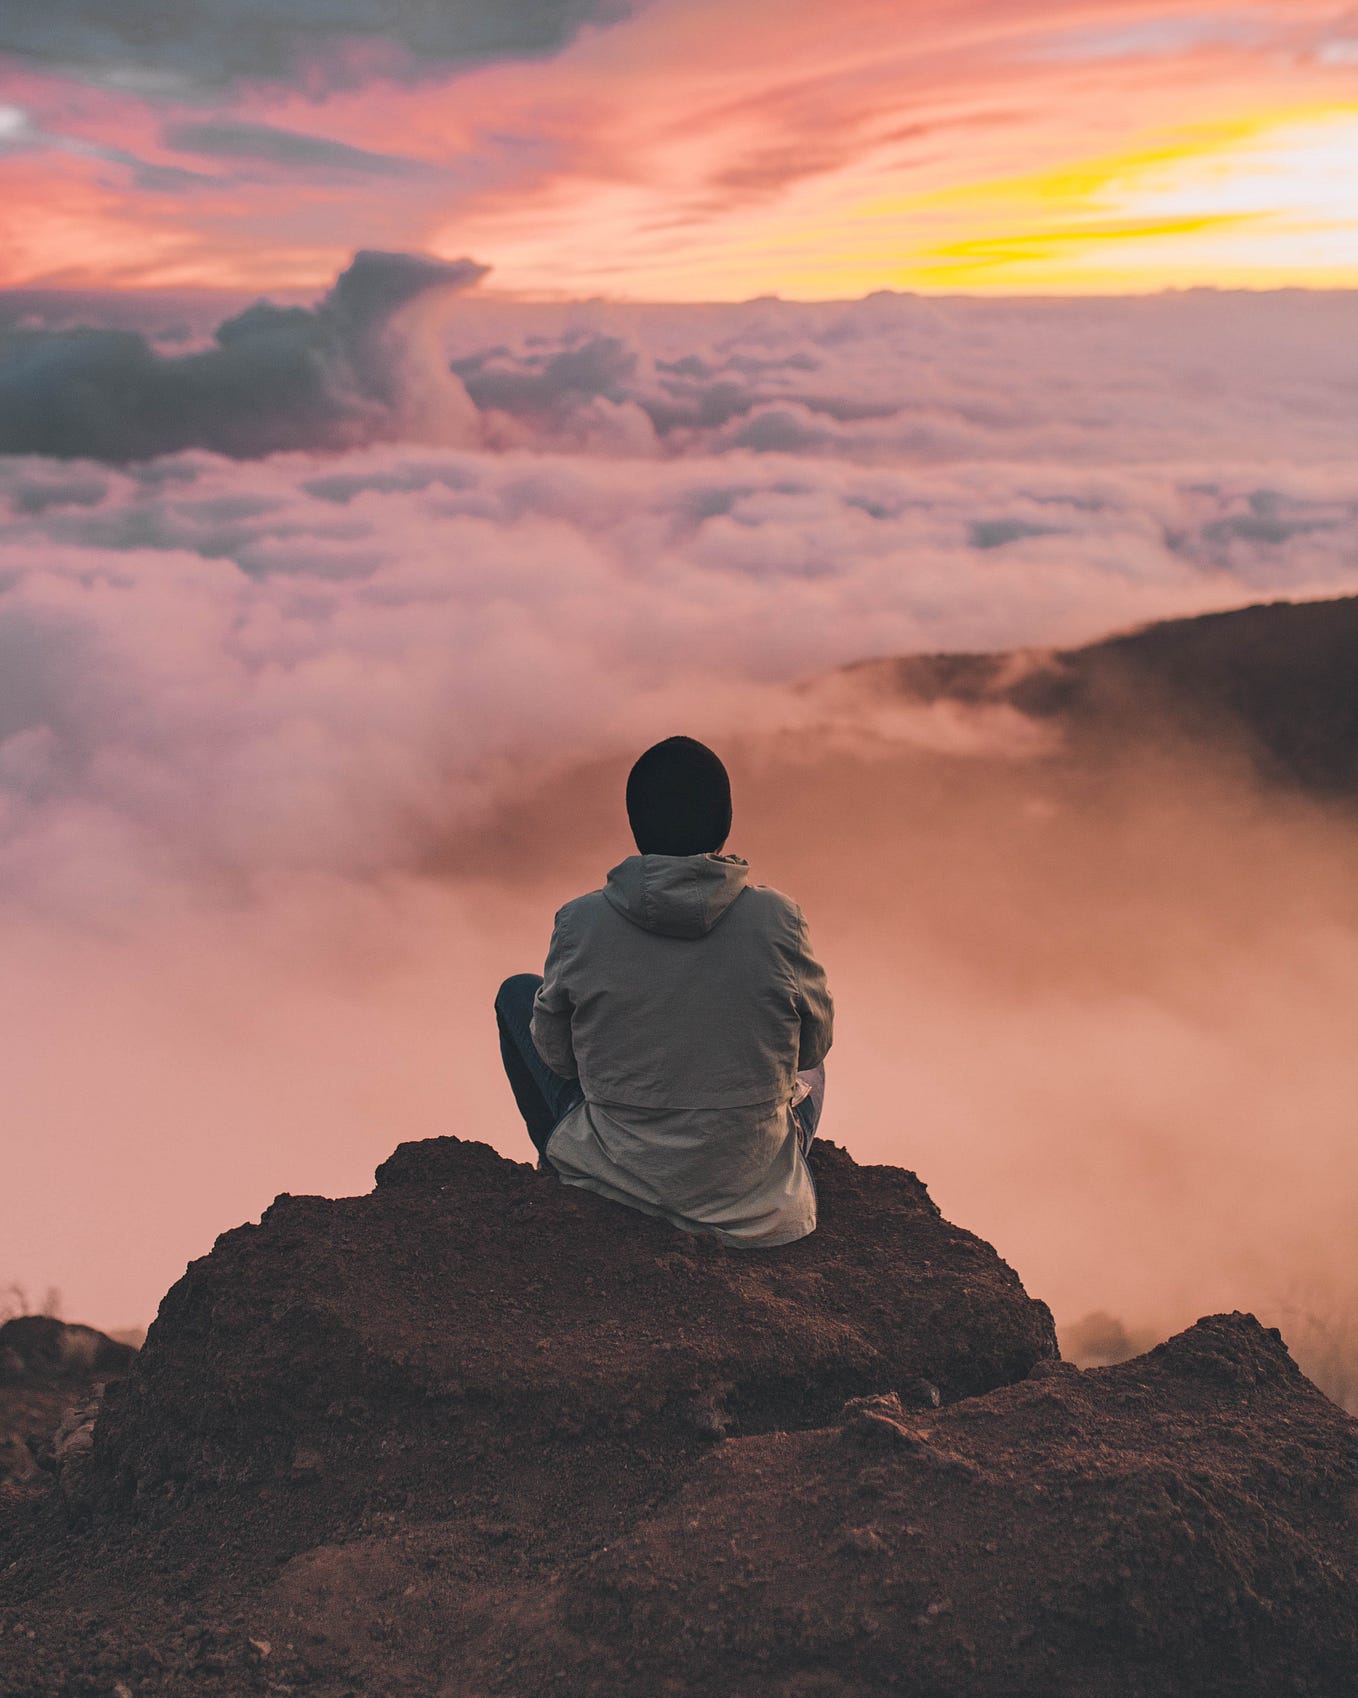 A man sitting cross-legged on a mountain top looking at the pink colored cloud canopy underneath his eyesight